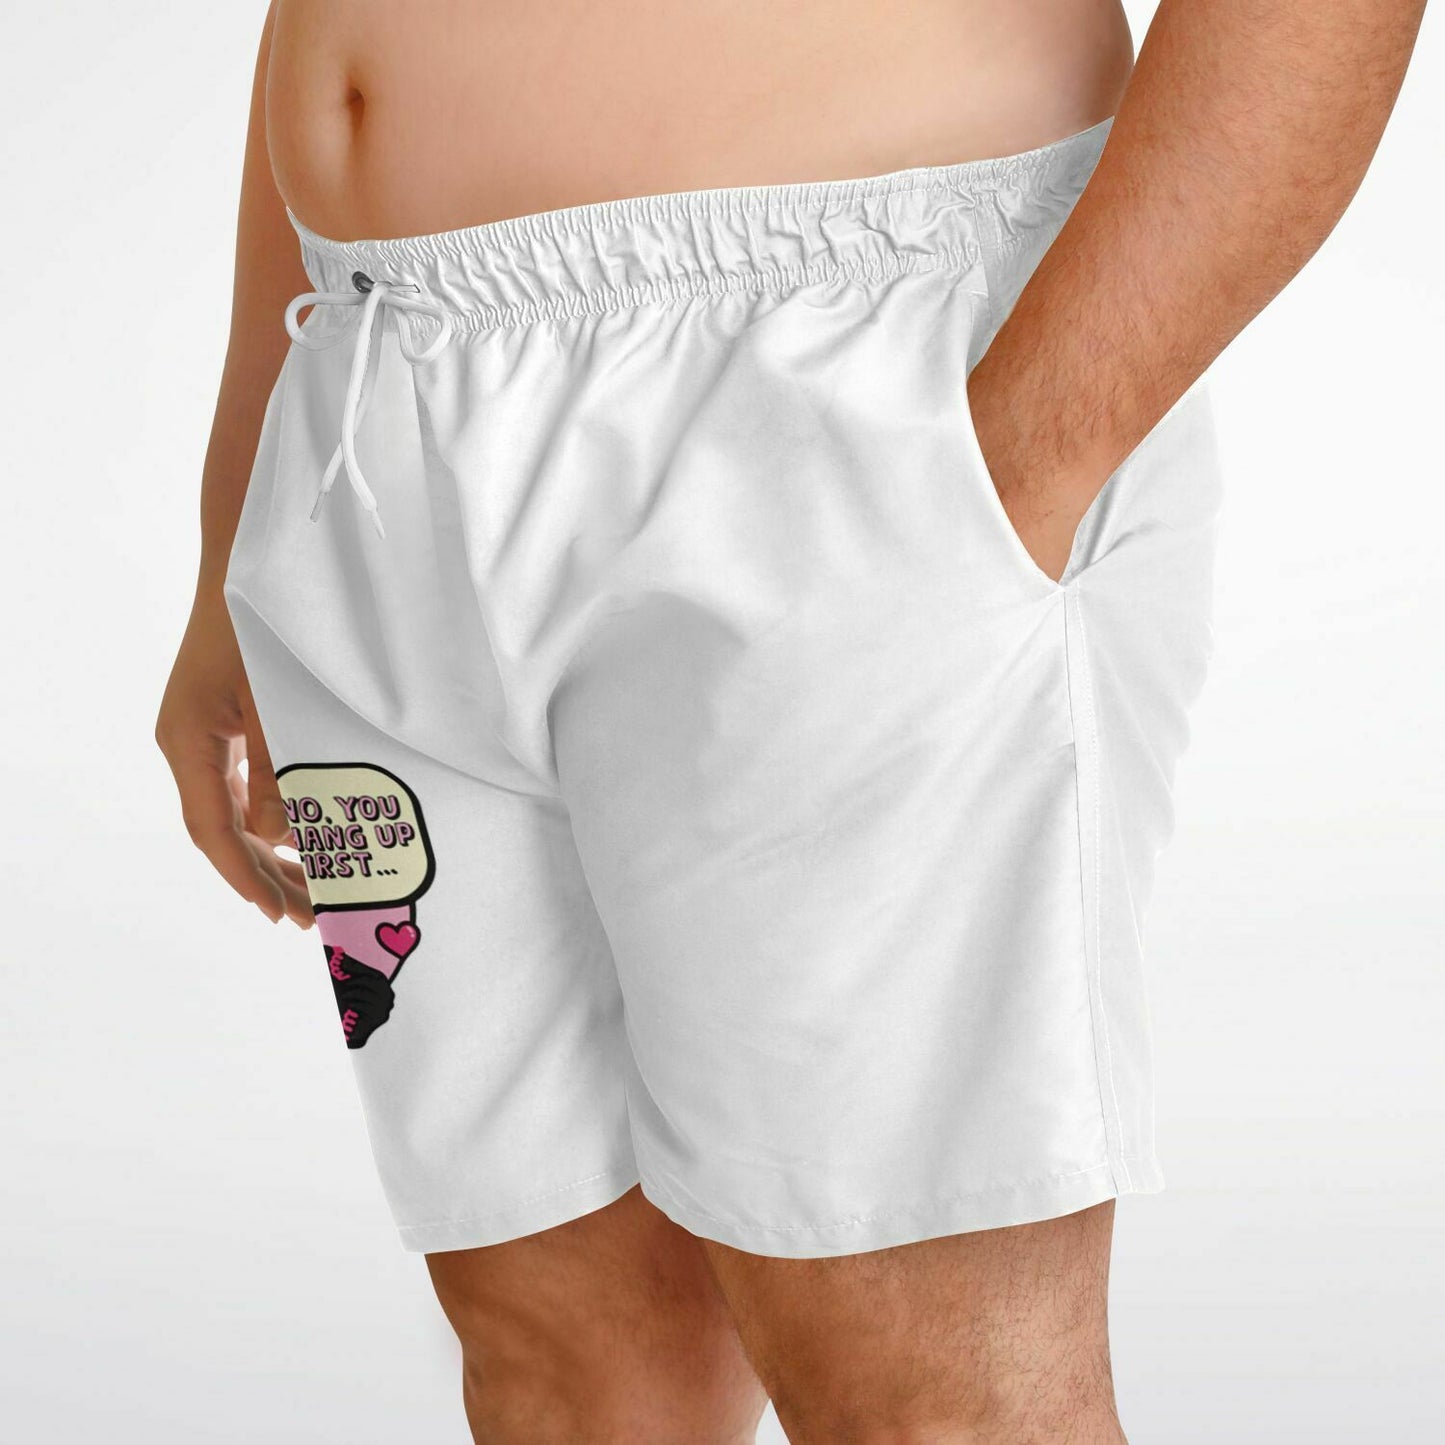 No You Hang Up! - Plus-size Swim Trunks